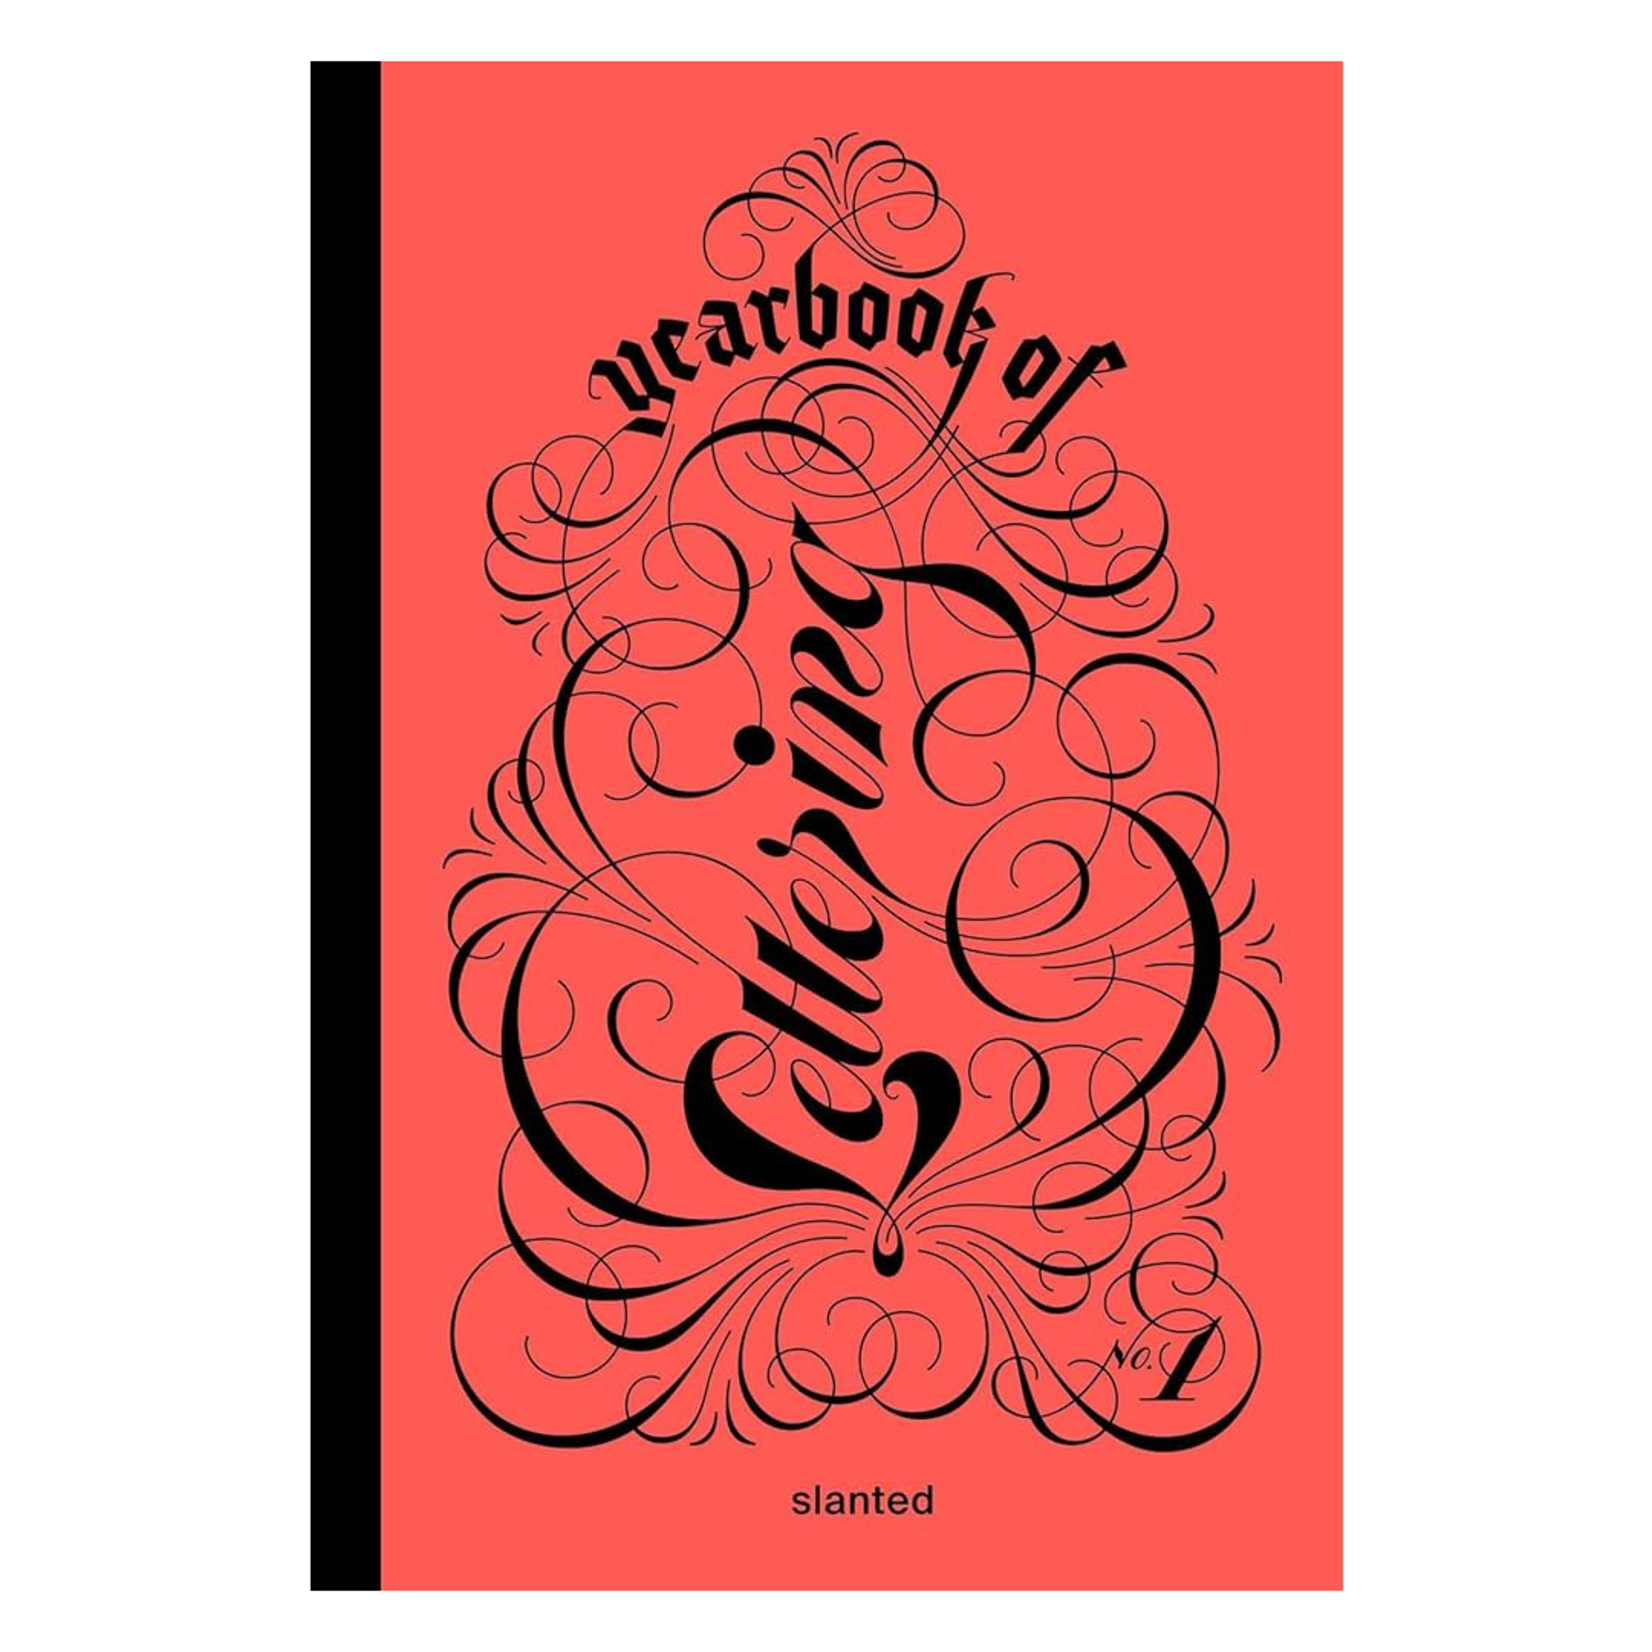 Slanted's Yearbook of Lettering